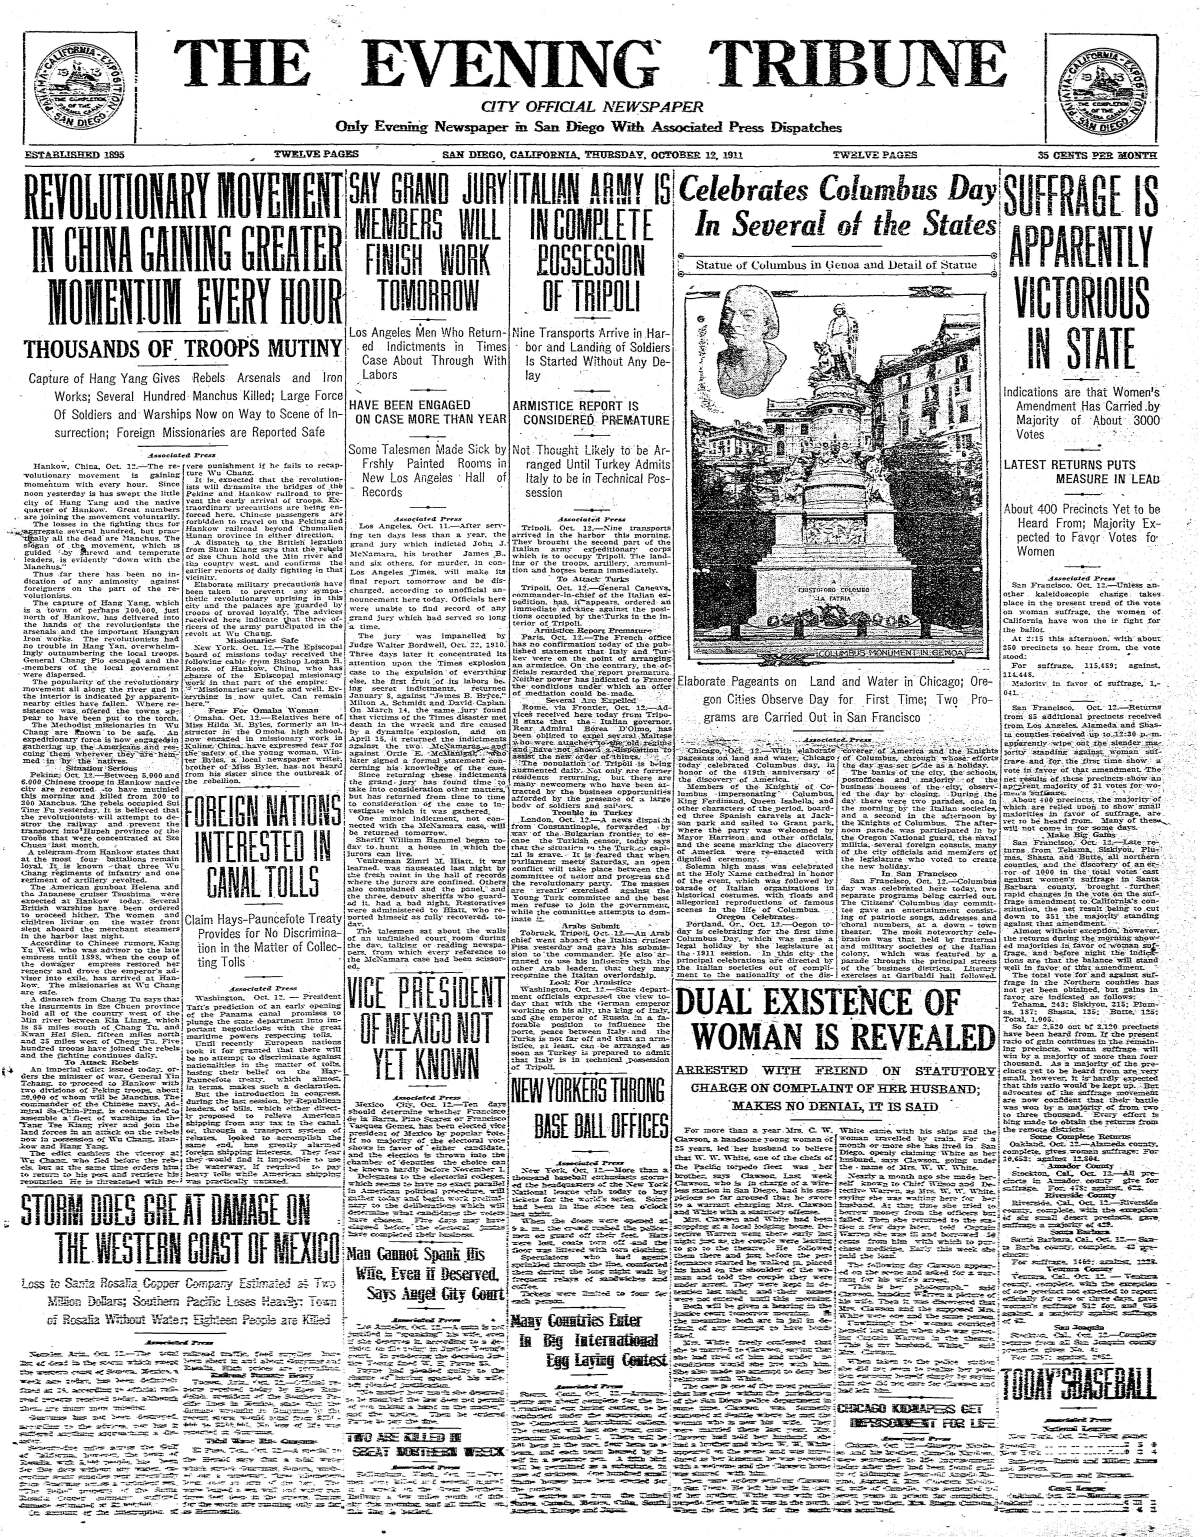 Front page of The Evening Tribune, Thursday, October 12, 1911